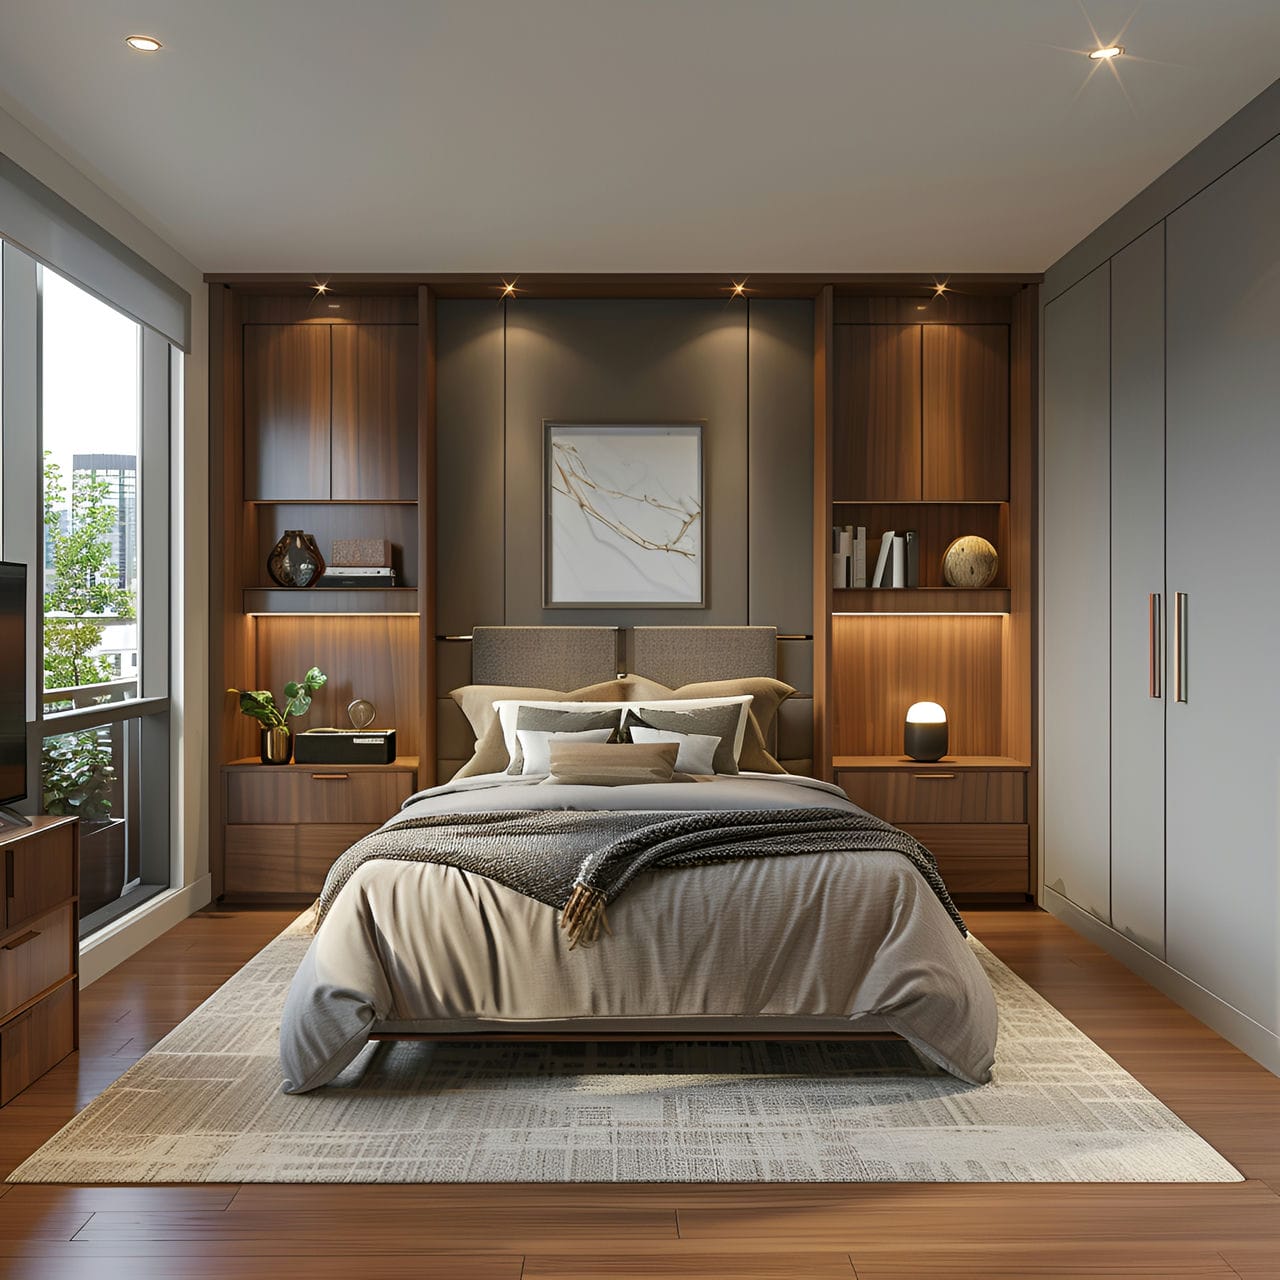 Master bedroom: size, functionality, uses, furniture and renovation